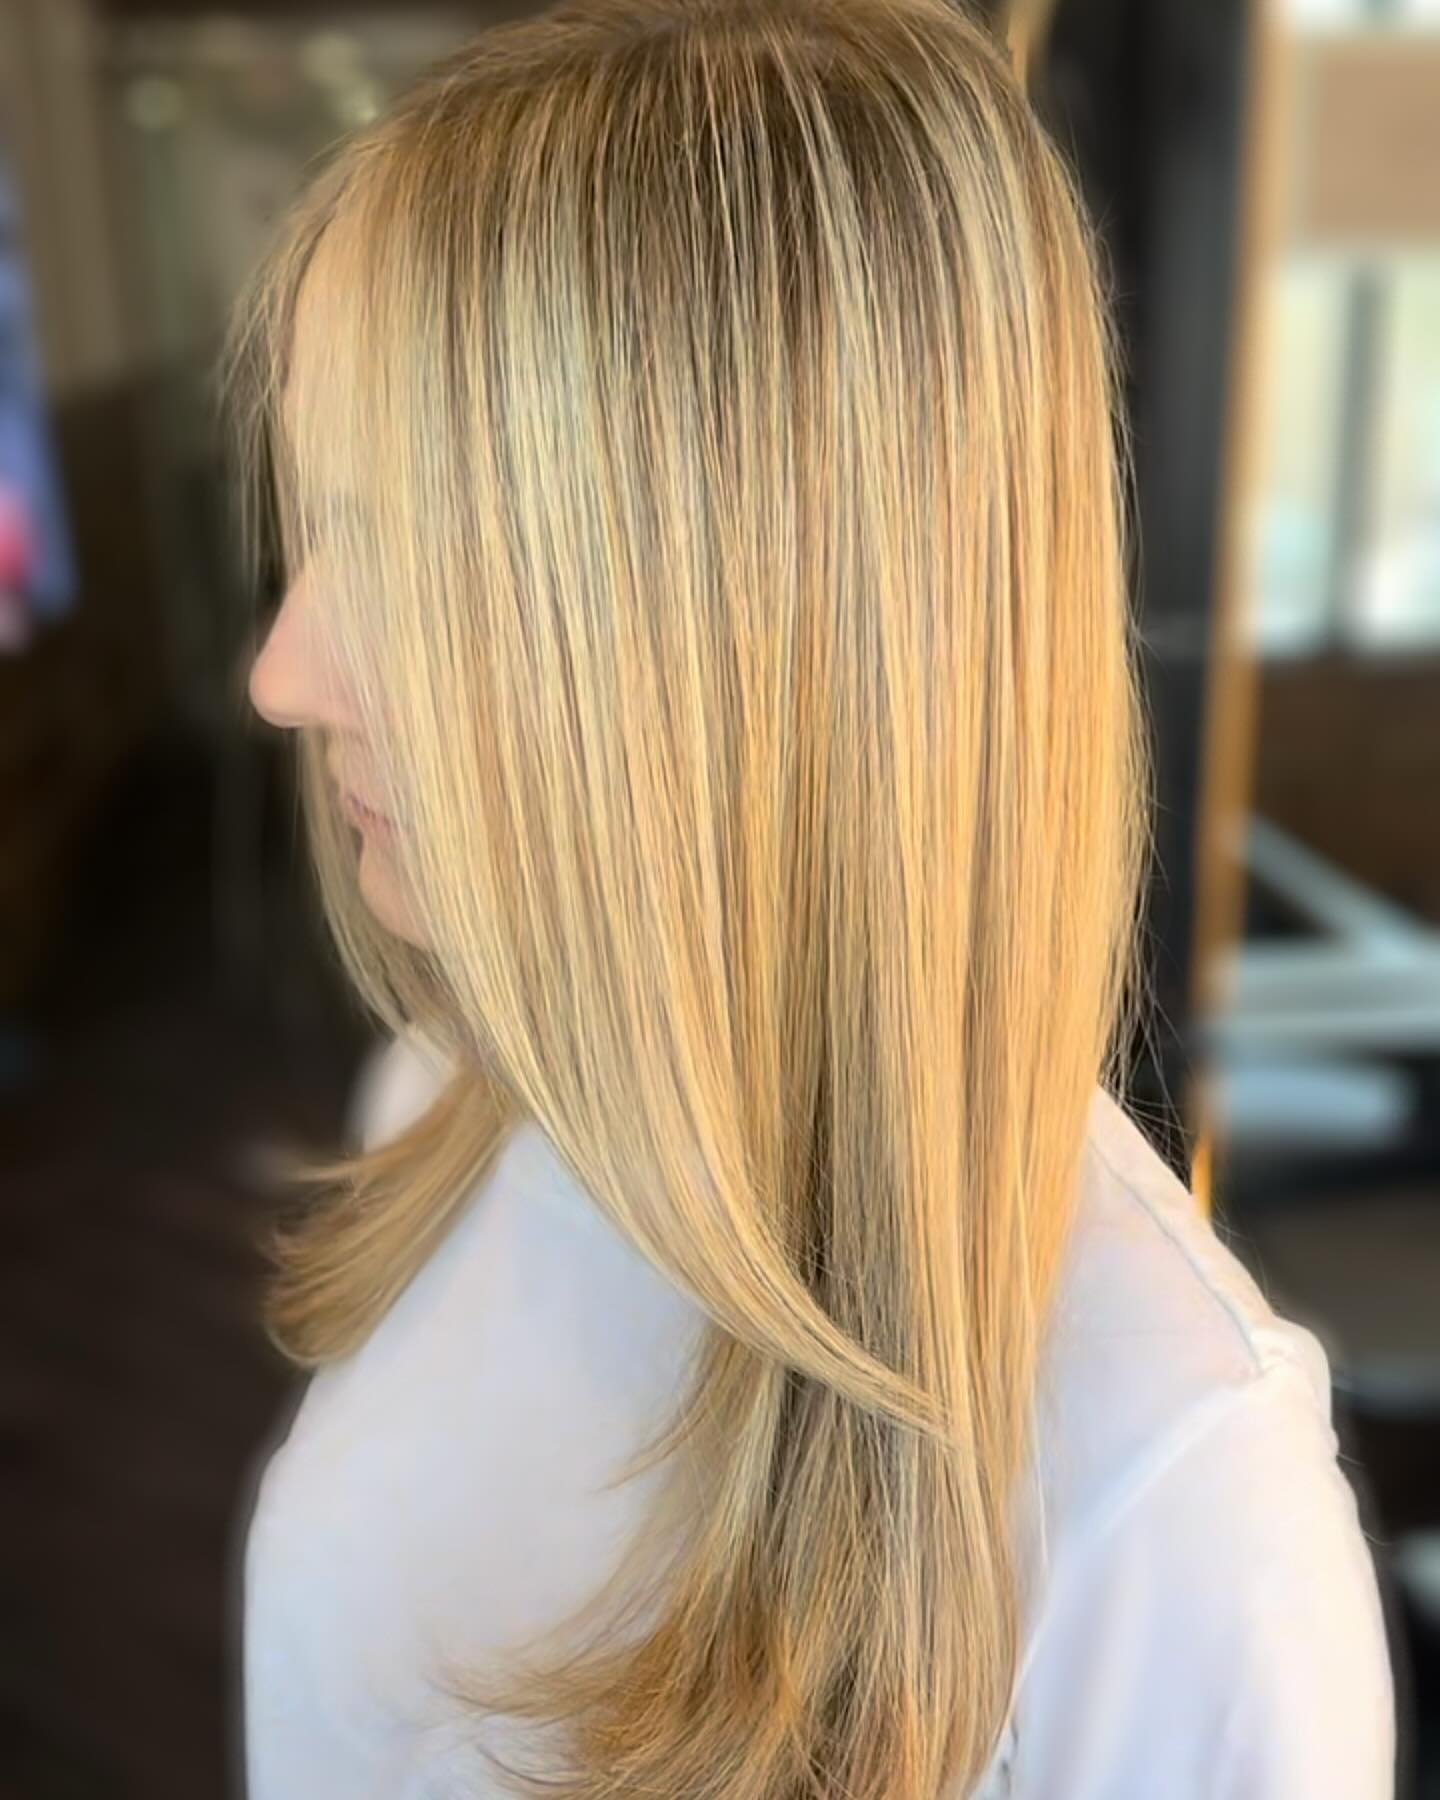 Looking for a new hairstylist? It shouldn&rsquo;t be intimidating, book your free consultation and go over your hair health and color expectations.  It&rsquo;s easy and it&rsquo;s complimentary.  Our new friend wanted to return to blonde, but did her